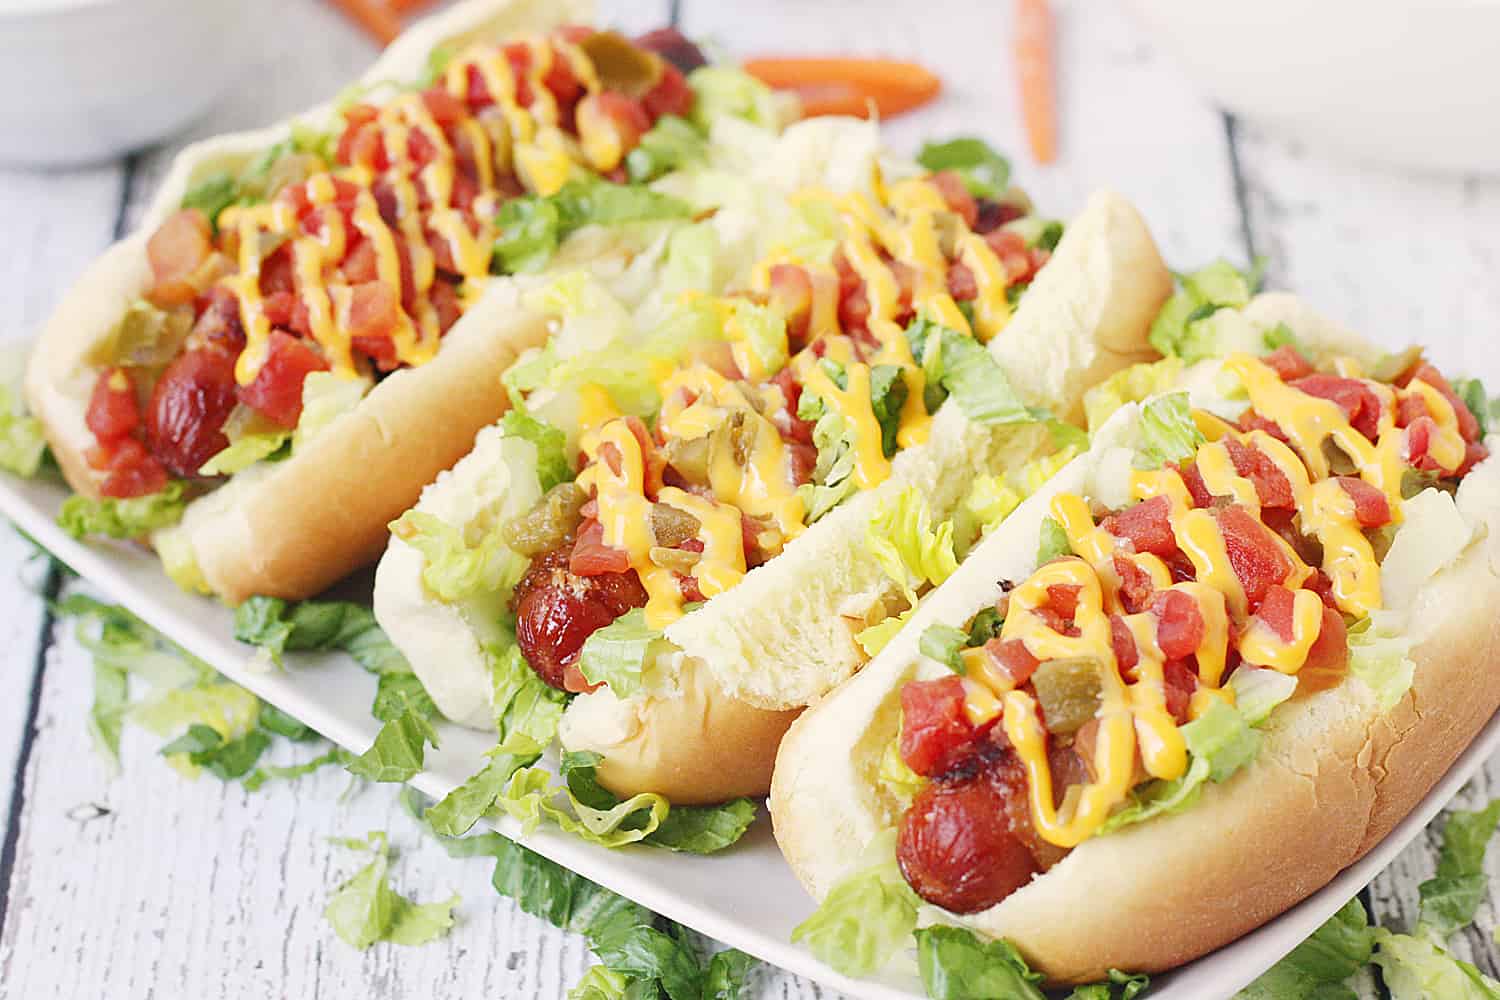 Spicy Bacon-Wrapped BLT Dogs -- Making bacon-wrapped hot dogs in the oven is easier than you think! Try this simple technique for bacon hot dogs as you throw together a batch of these spicy BLT dogs drizzled with melted cheese sauce. #halfscratched #hotdogs #blt #bacon #easyrecipe #maindish #bbq #barbecue #grilling